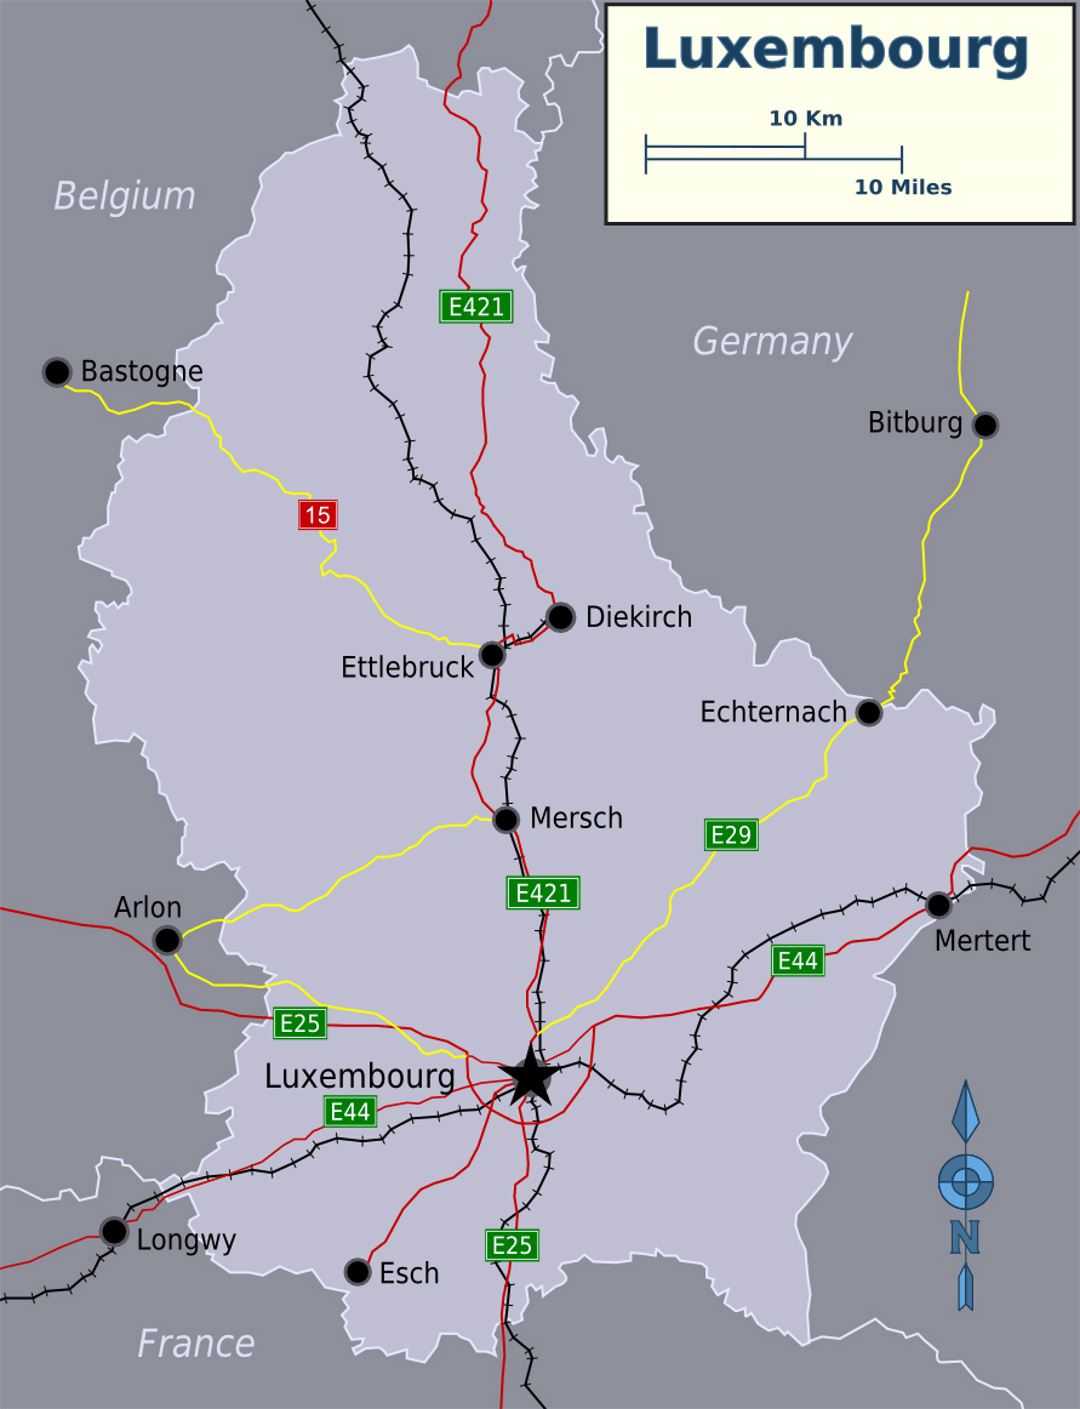 Detailed map of Luxembourg